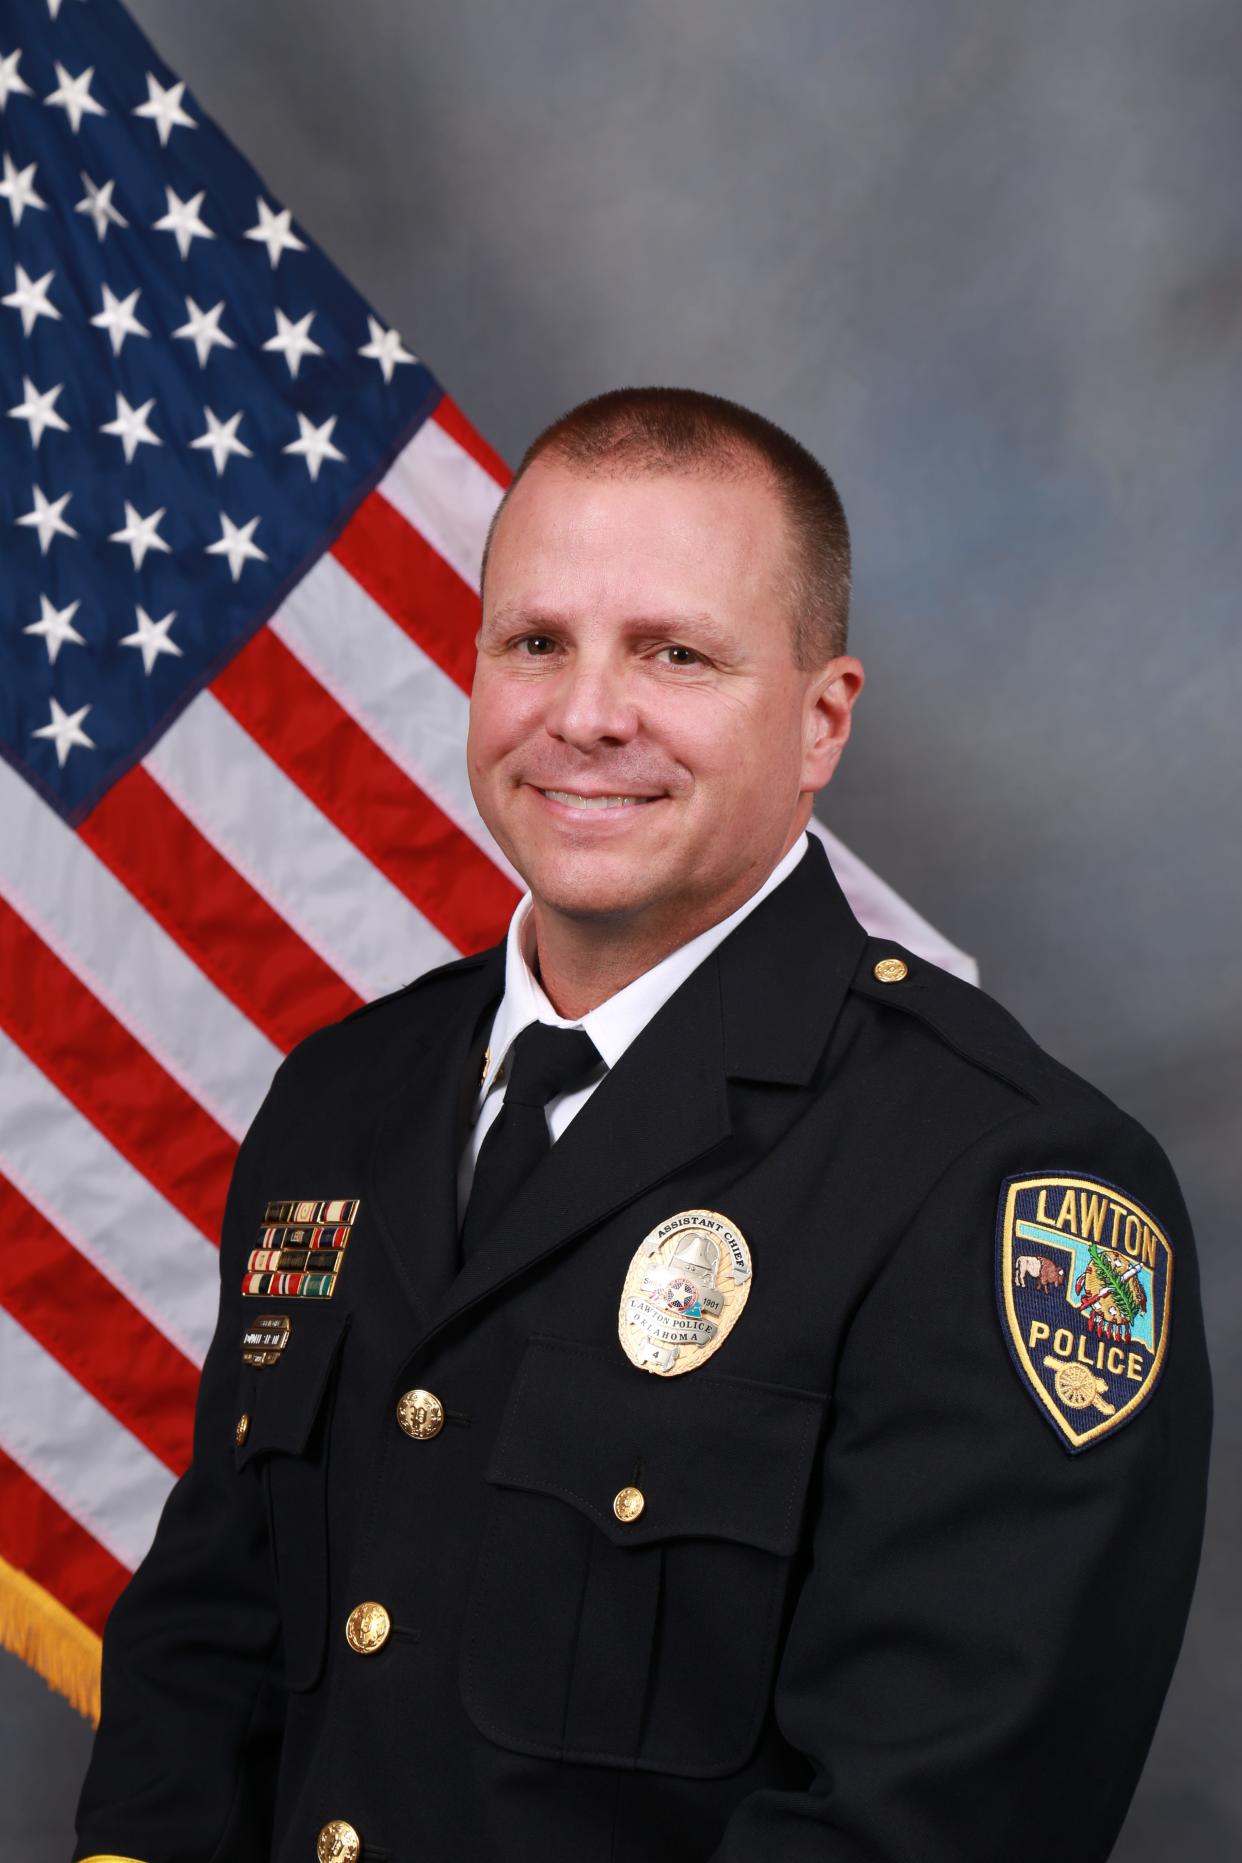 Rondell Seratte, Assistant Chief of Police - Lawton Police Department, Lawton, Oklahoma